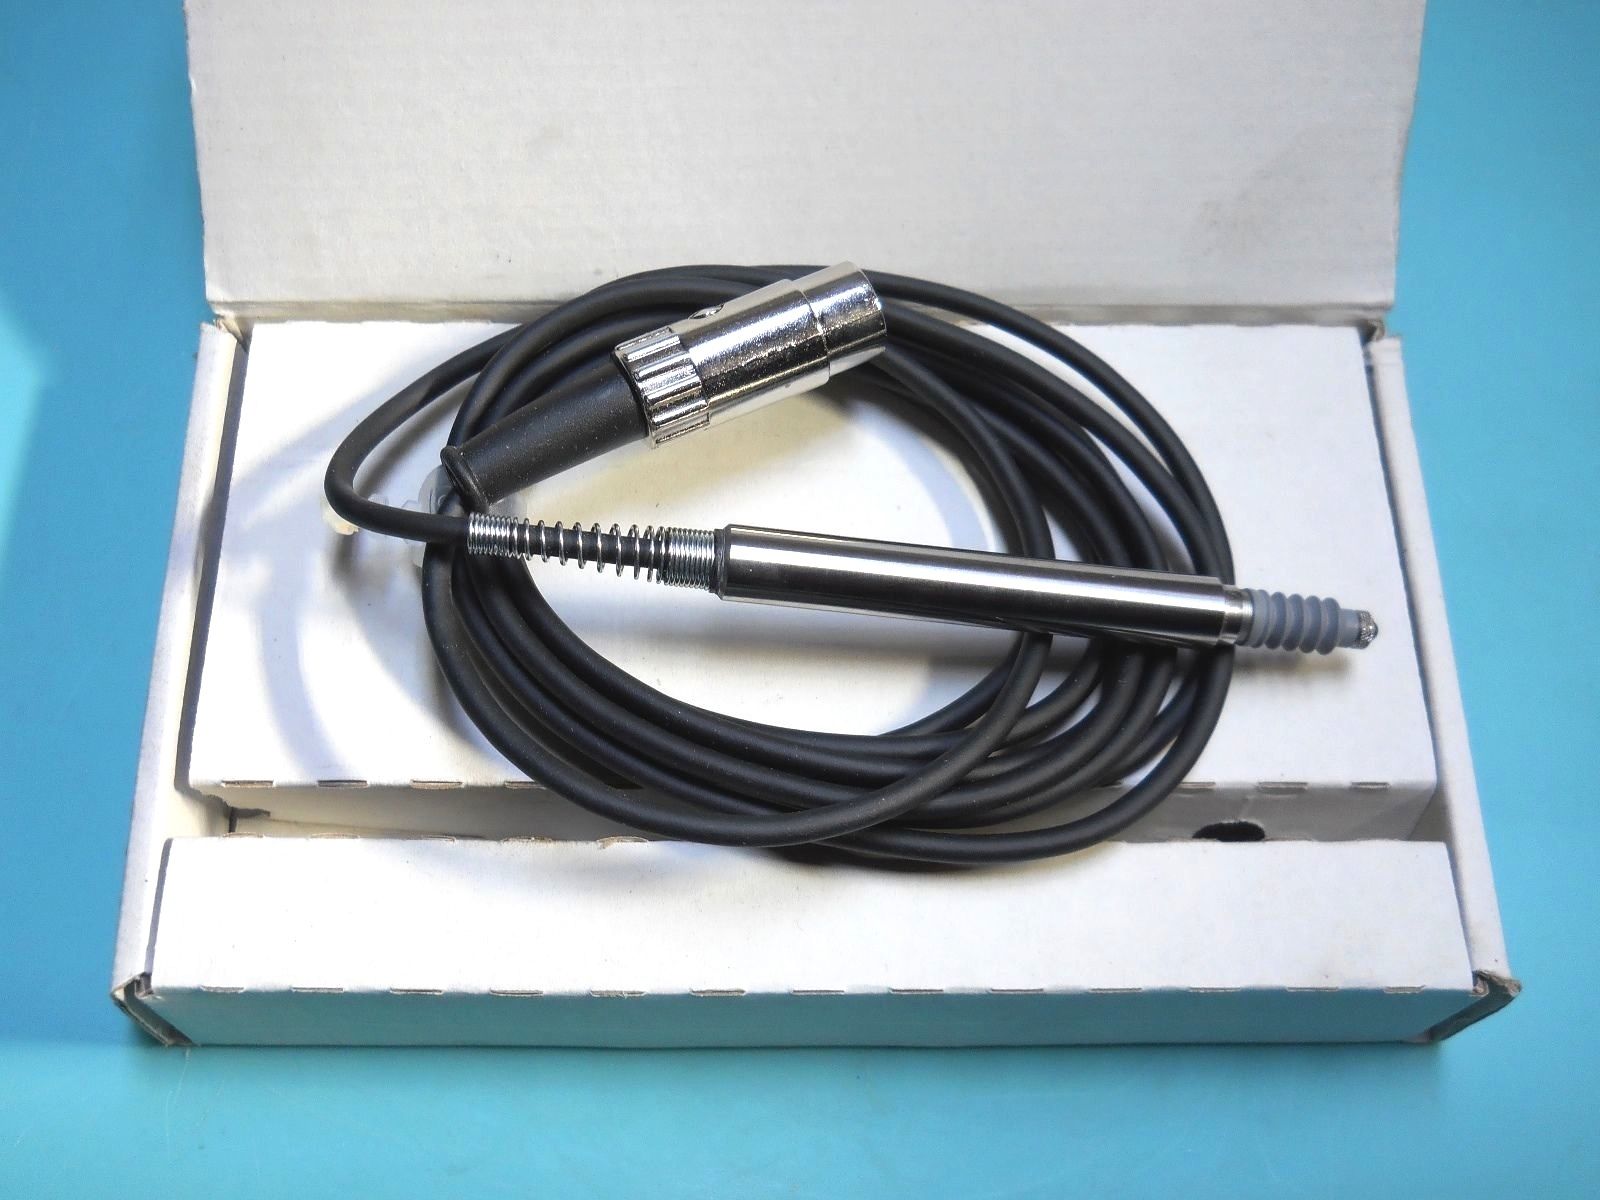 SIEMENS 13820-54X LINEAR TRANSDUCER PROBE ASSEMBLY M923225A440F-02 NEW IN BOX DIAGNOSTIC ULTRASOUND MACHINES FOR SALE